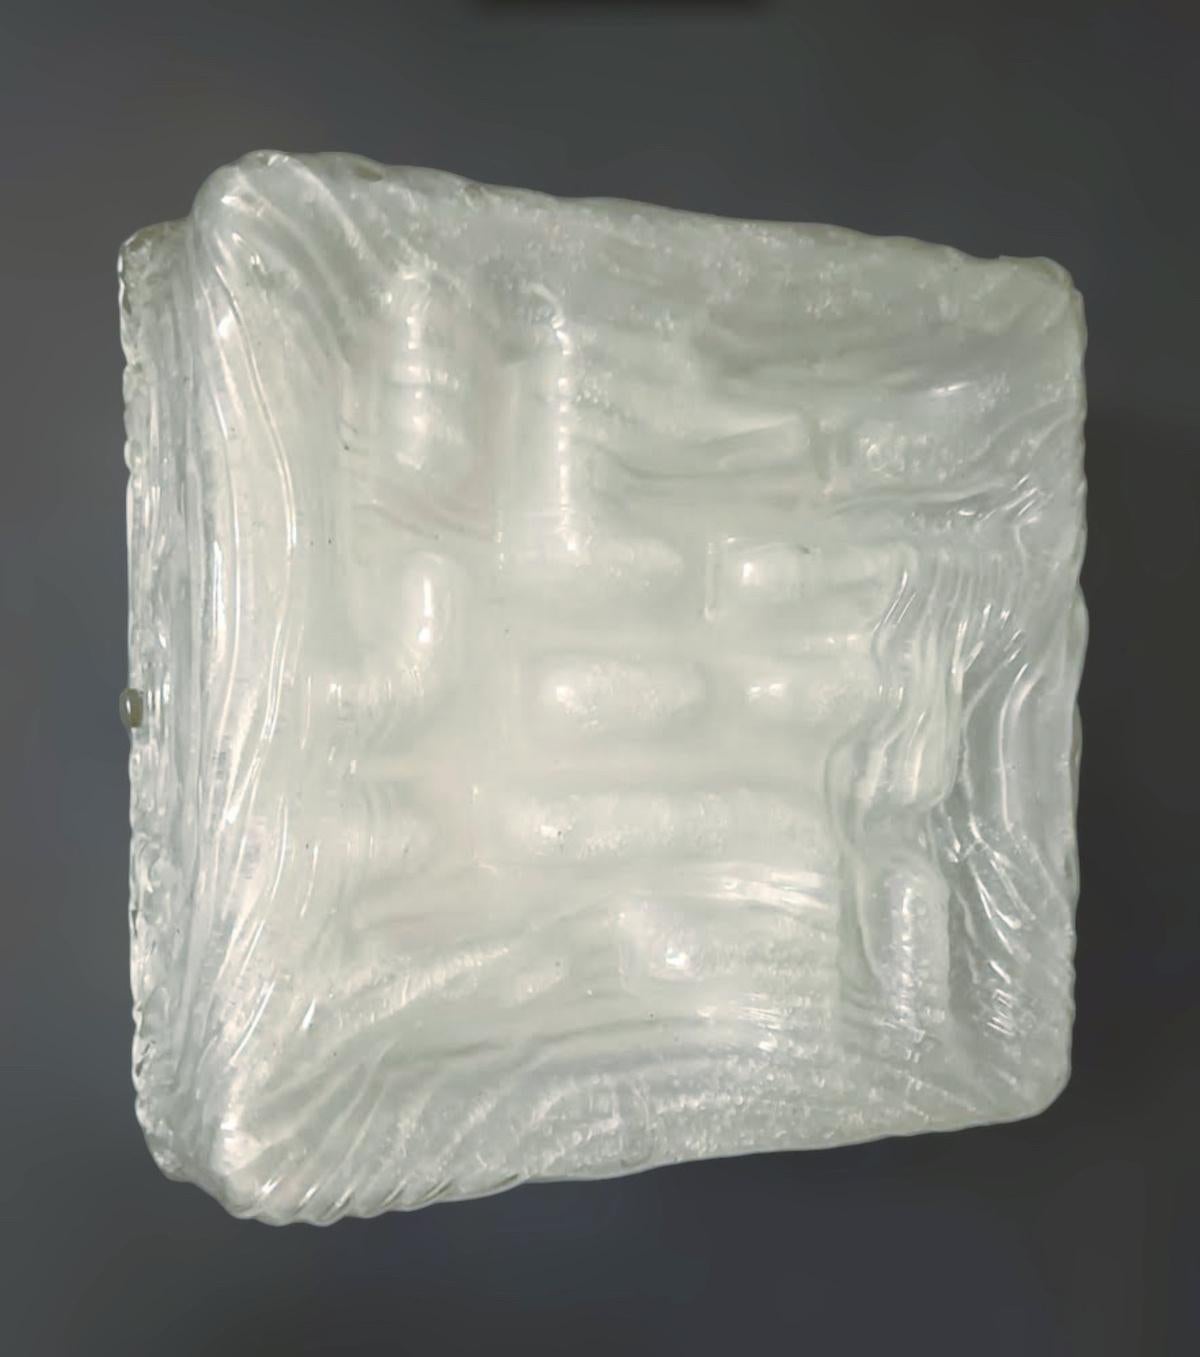 Vintage Italian wall light or flush mount with a single square milky white textured Murano glass shade / Made in Italy by Mazzega, circa 1960s
Width 14.5 inches, length 14.5 inches, depth 6 inches
4 lights / E26 or E27 type / max 60W each
1